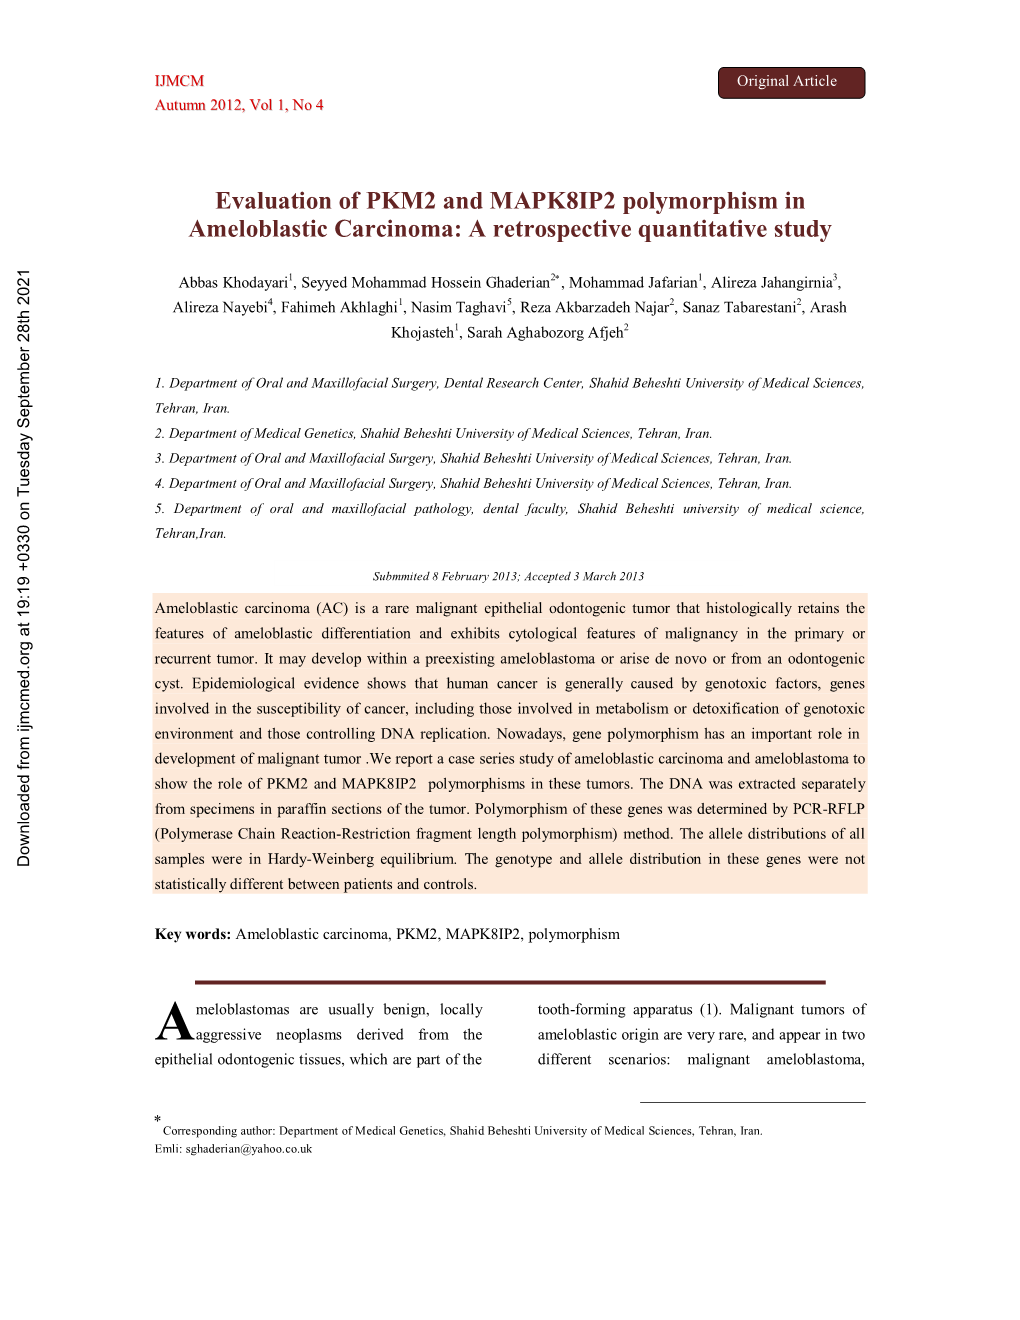 Evaluation of PKM2 and MAPK8IP2 Polymorphism in Ameloblastic Carcinoma: a Retrospective Quantitative Study